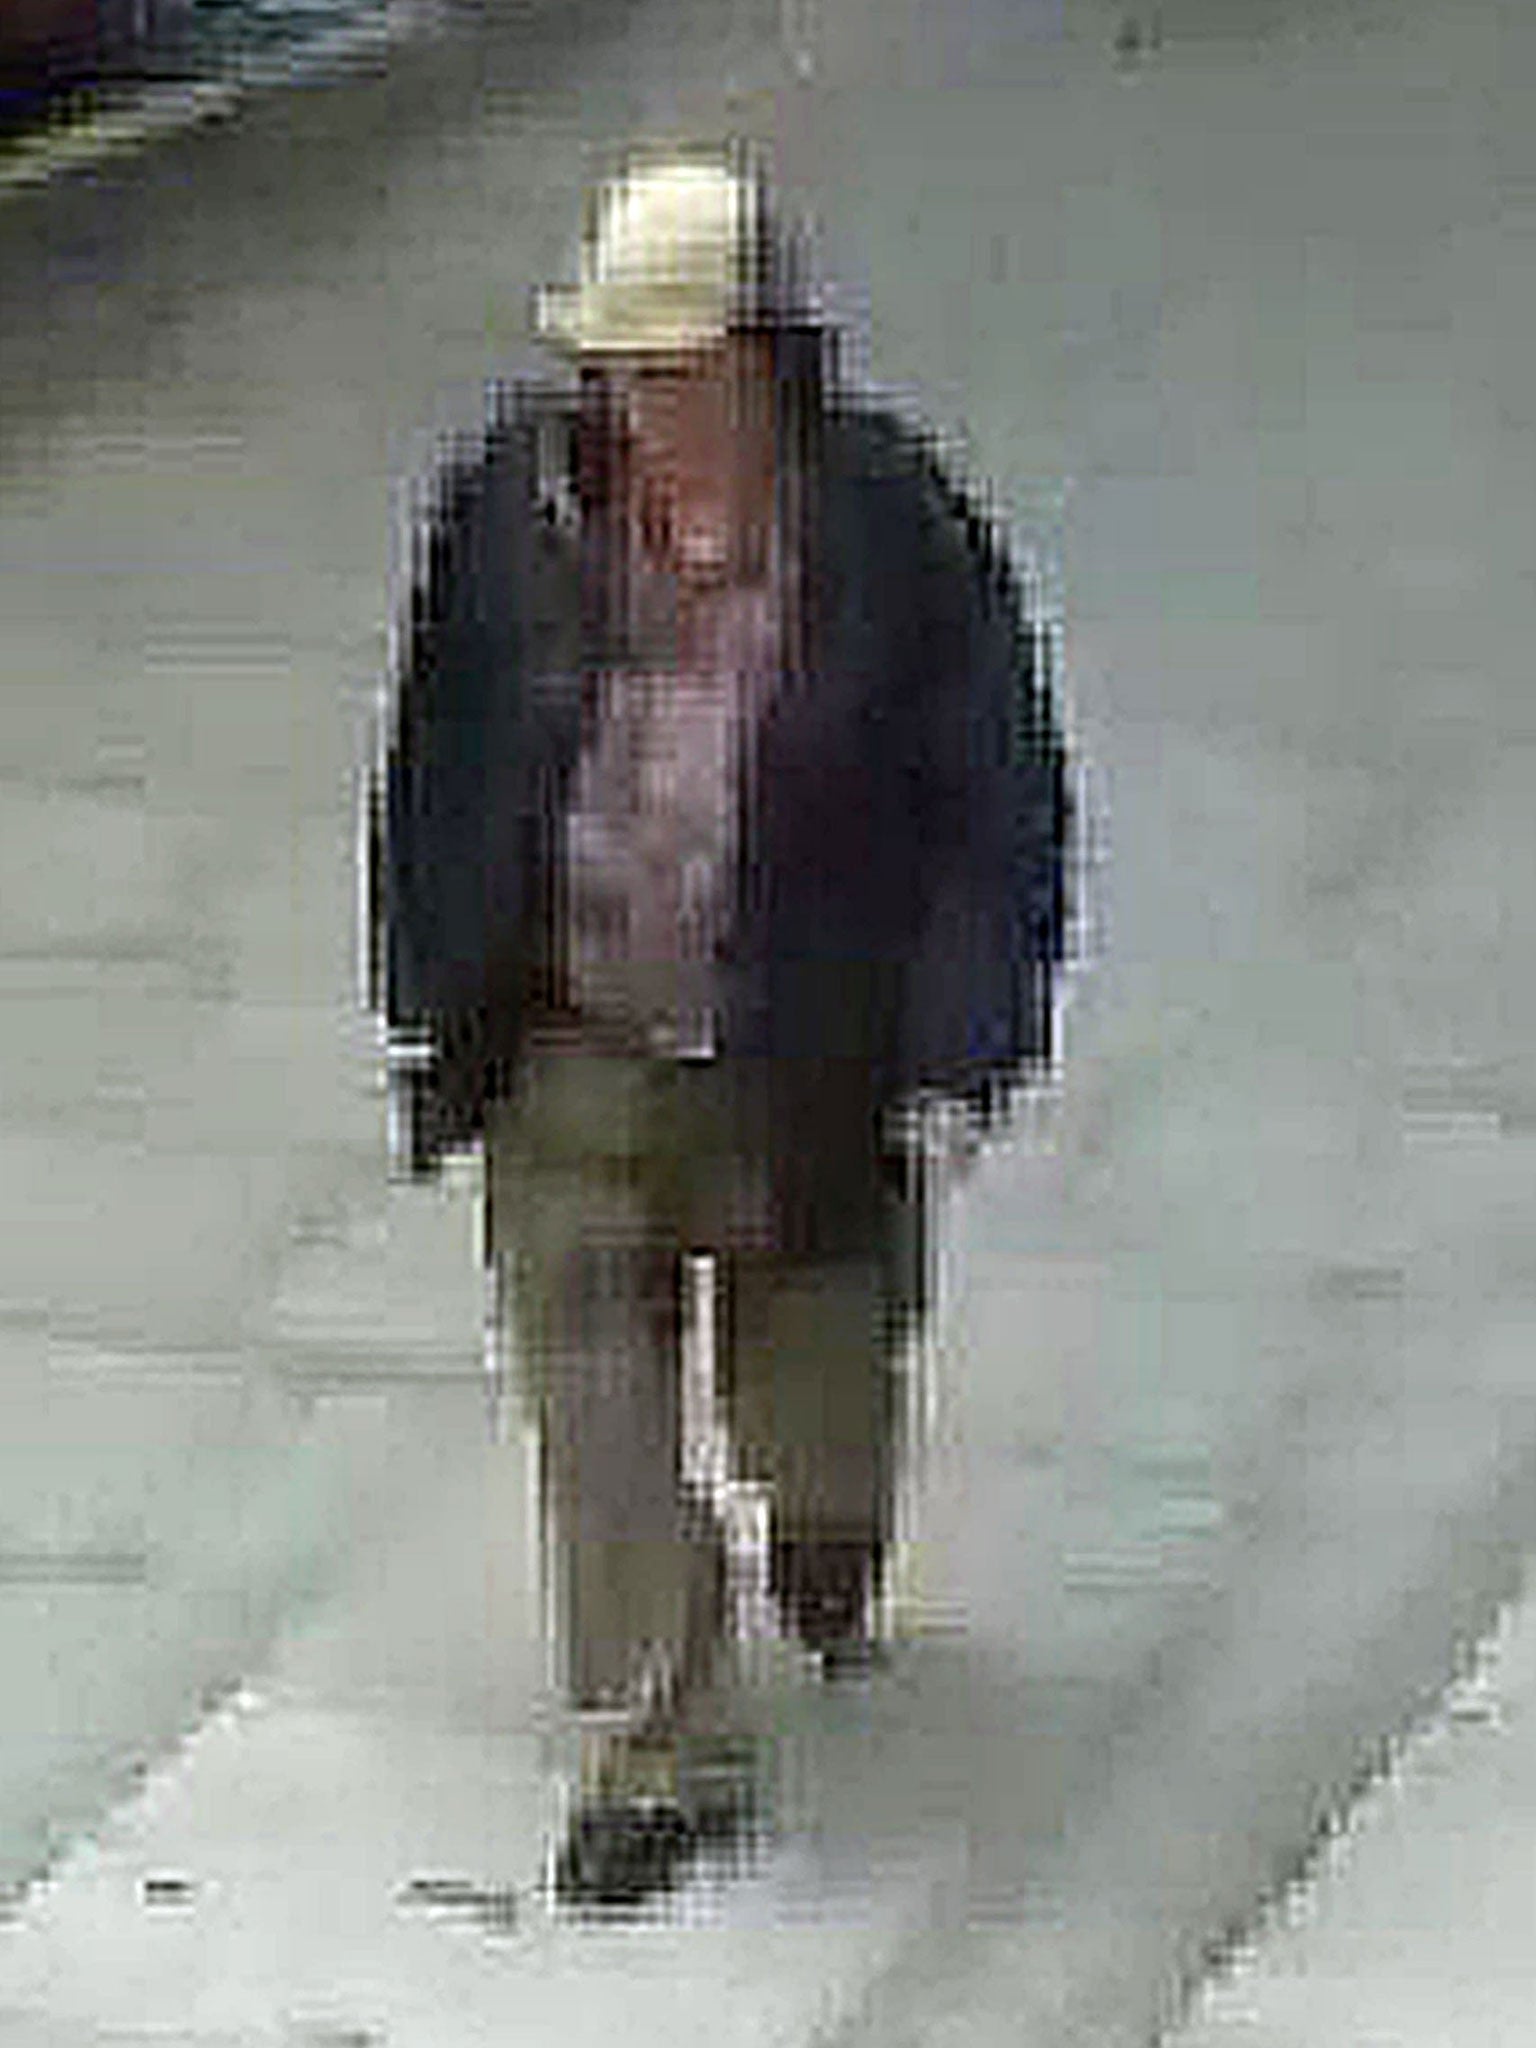 Metropolitan Police image of a man in the area of the Calthorpe Project in central London, who they wish to speak to in relation to the sexual assault of a 6-year-old boy